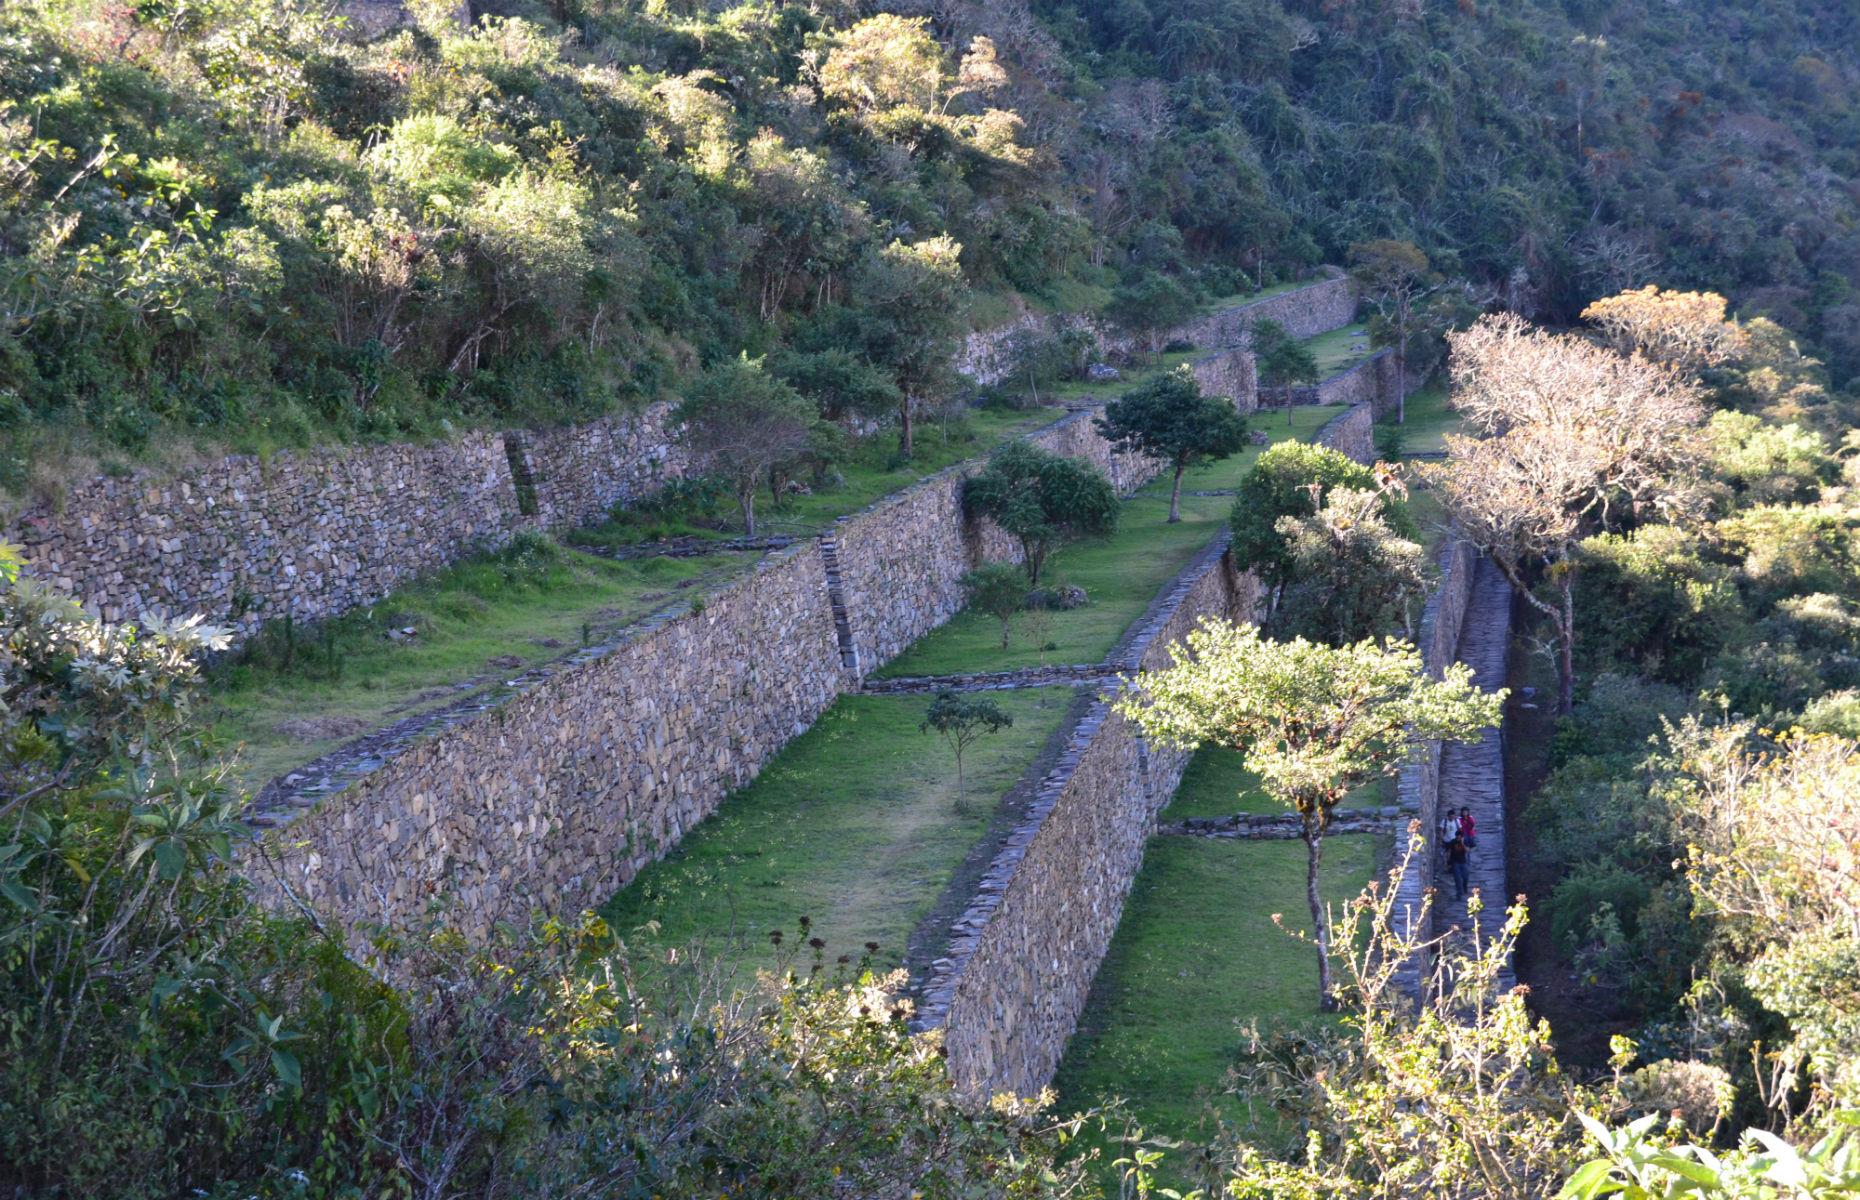 <p>If you’re interested in discovering more about the Incas, look beyond Machu Picchu: in particular, take the spectacular nearly 40-mile trek to Choquequirao, one of the last refuges of the Incas. With far fewer crowds than Machu Picchu, this set of ruins is said to be three times the size of the more famous lost city. It’s a perfect spot for those who love discovery, as the enormous archaeological complex abandoned in the 16th century is still being excavated today.</p>